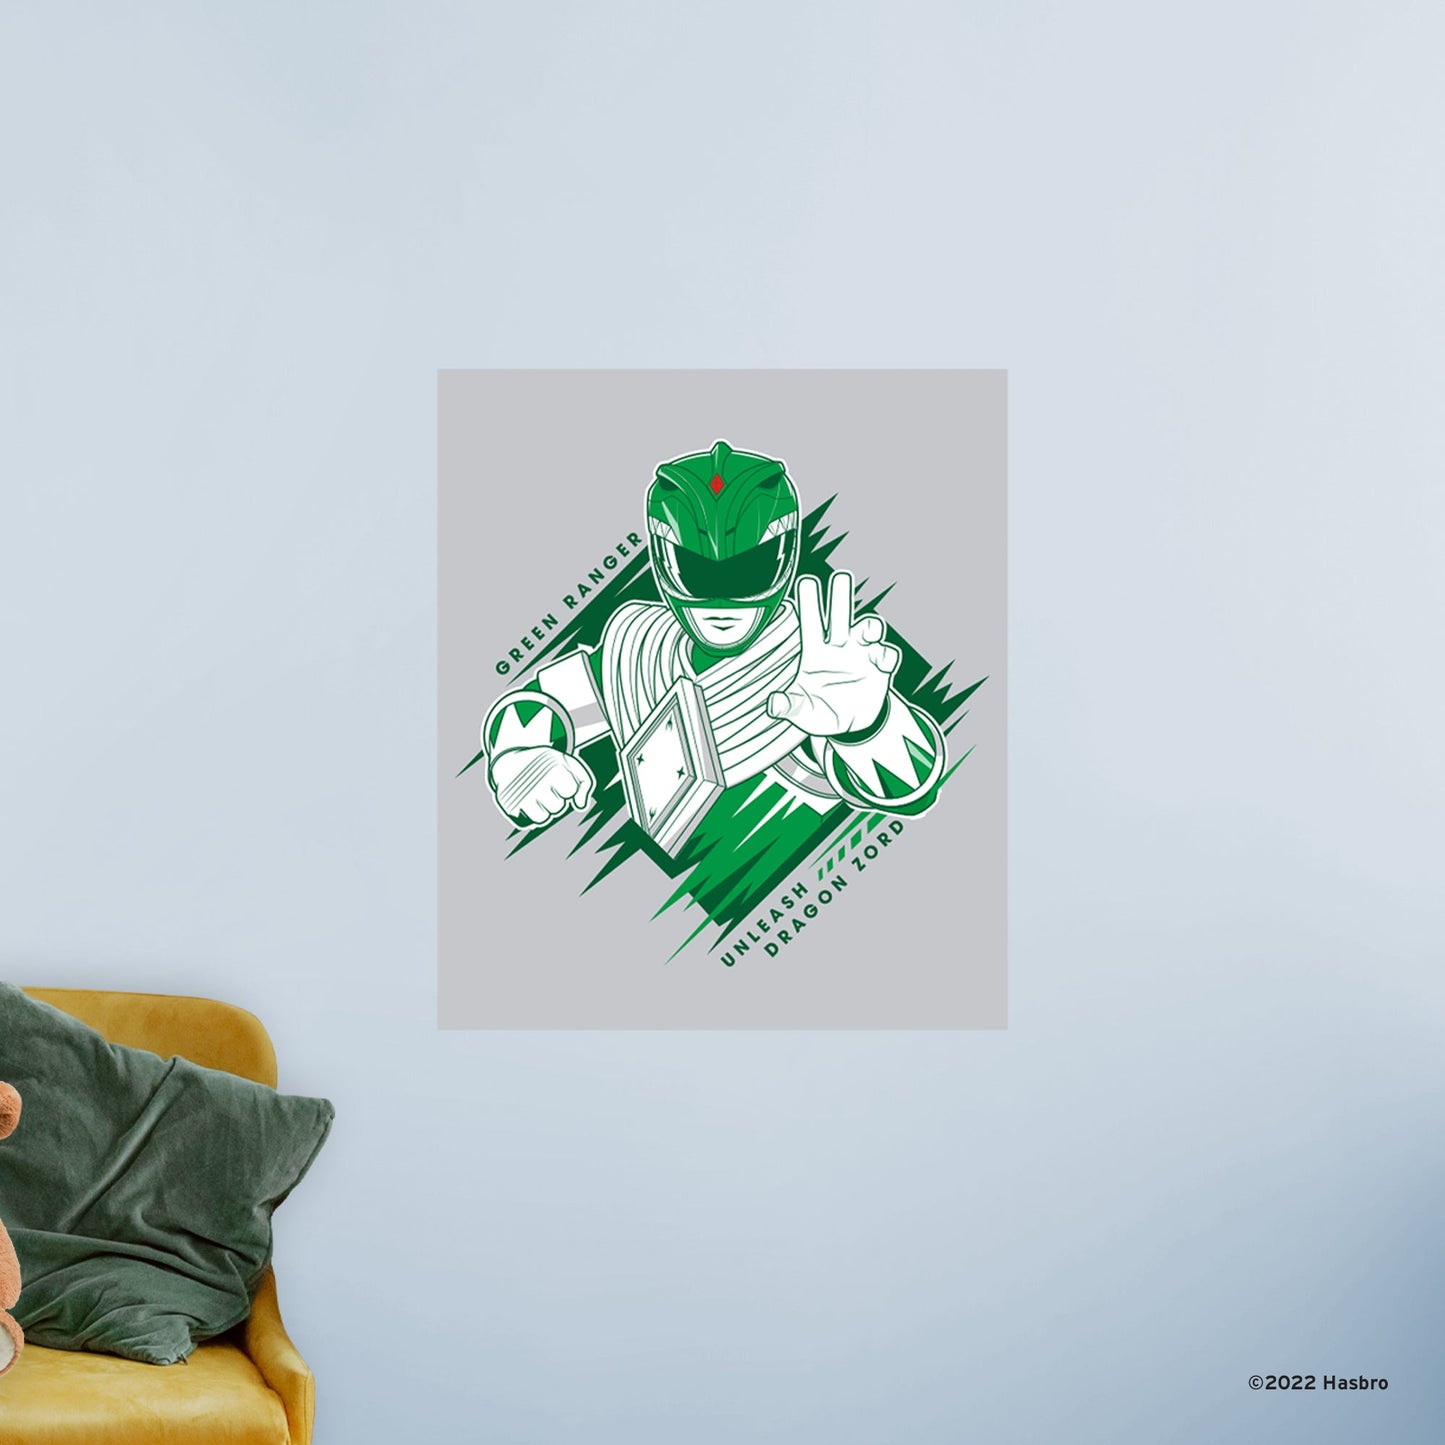 Power Rangers: Unleash Dragon Zord Poster - Officially Licensed Hasbro Removable Adhesive Decal